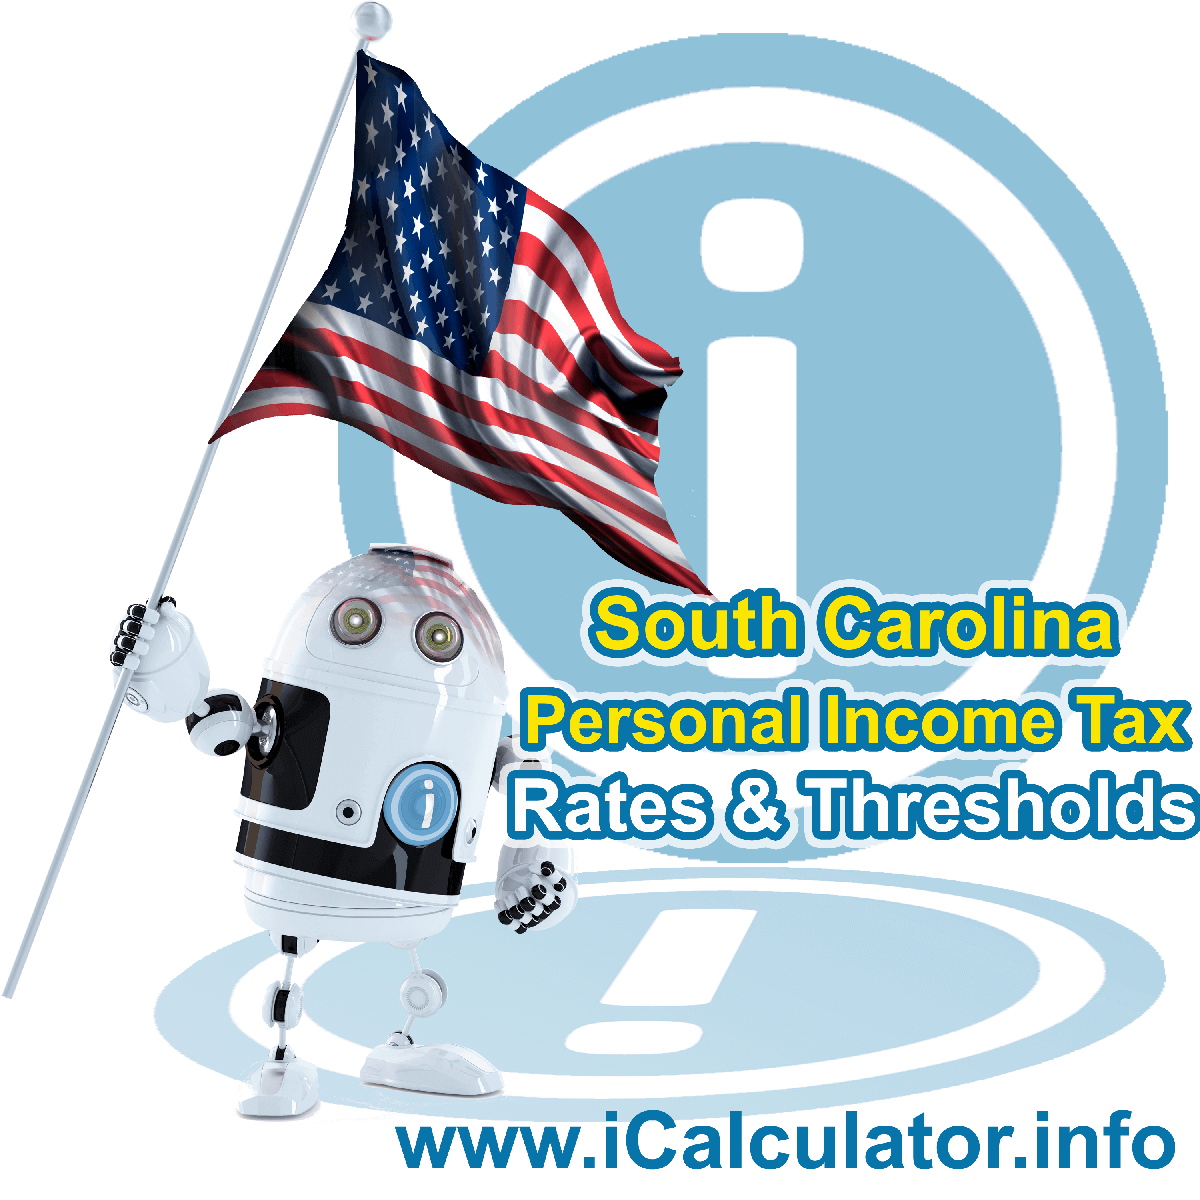 South Carolina State Tax Tables 2023. This image displays details of the South Carolina State Tax Tables for the 2023 tax return year which is provided in support of the 2023 US Tax Calculator